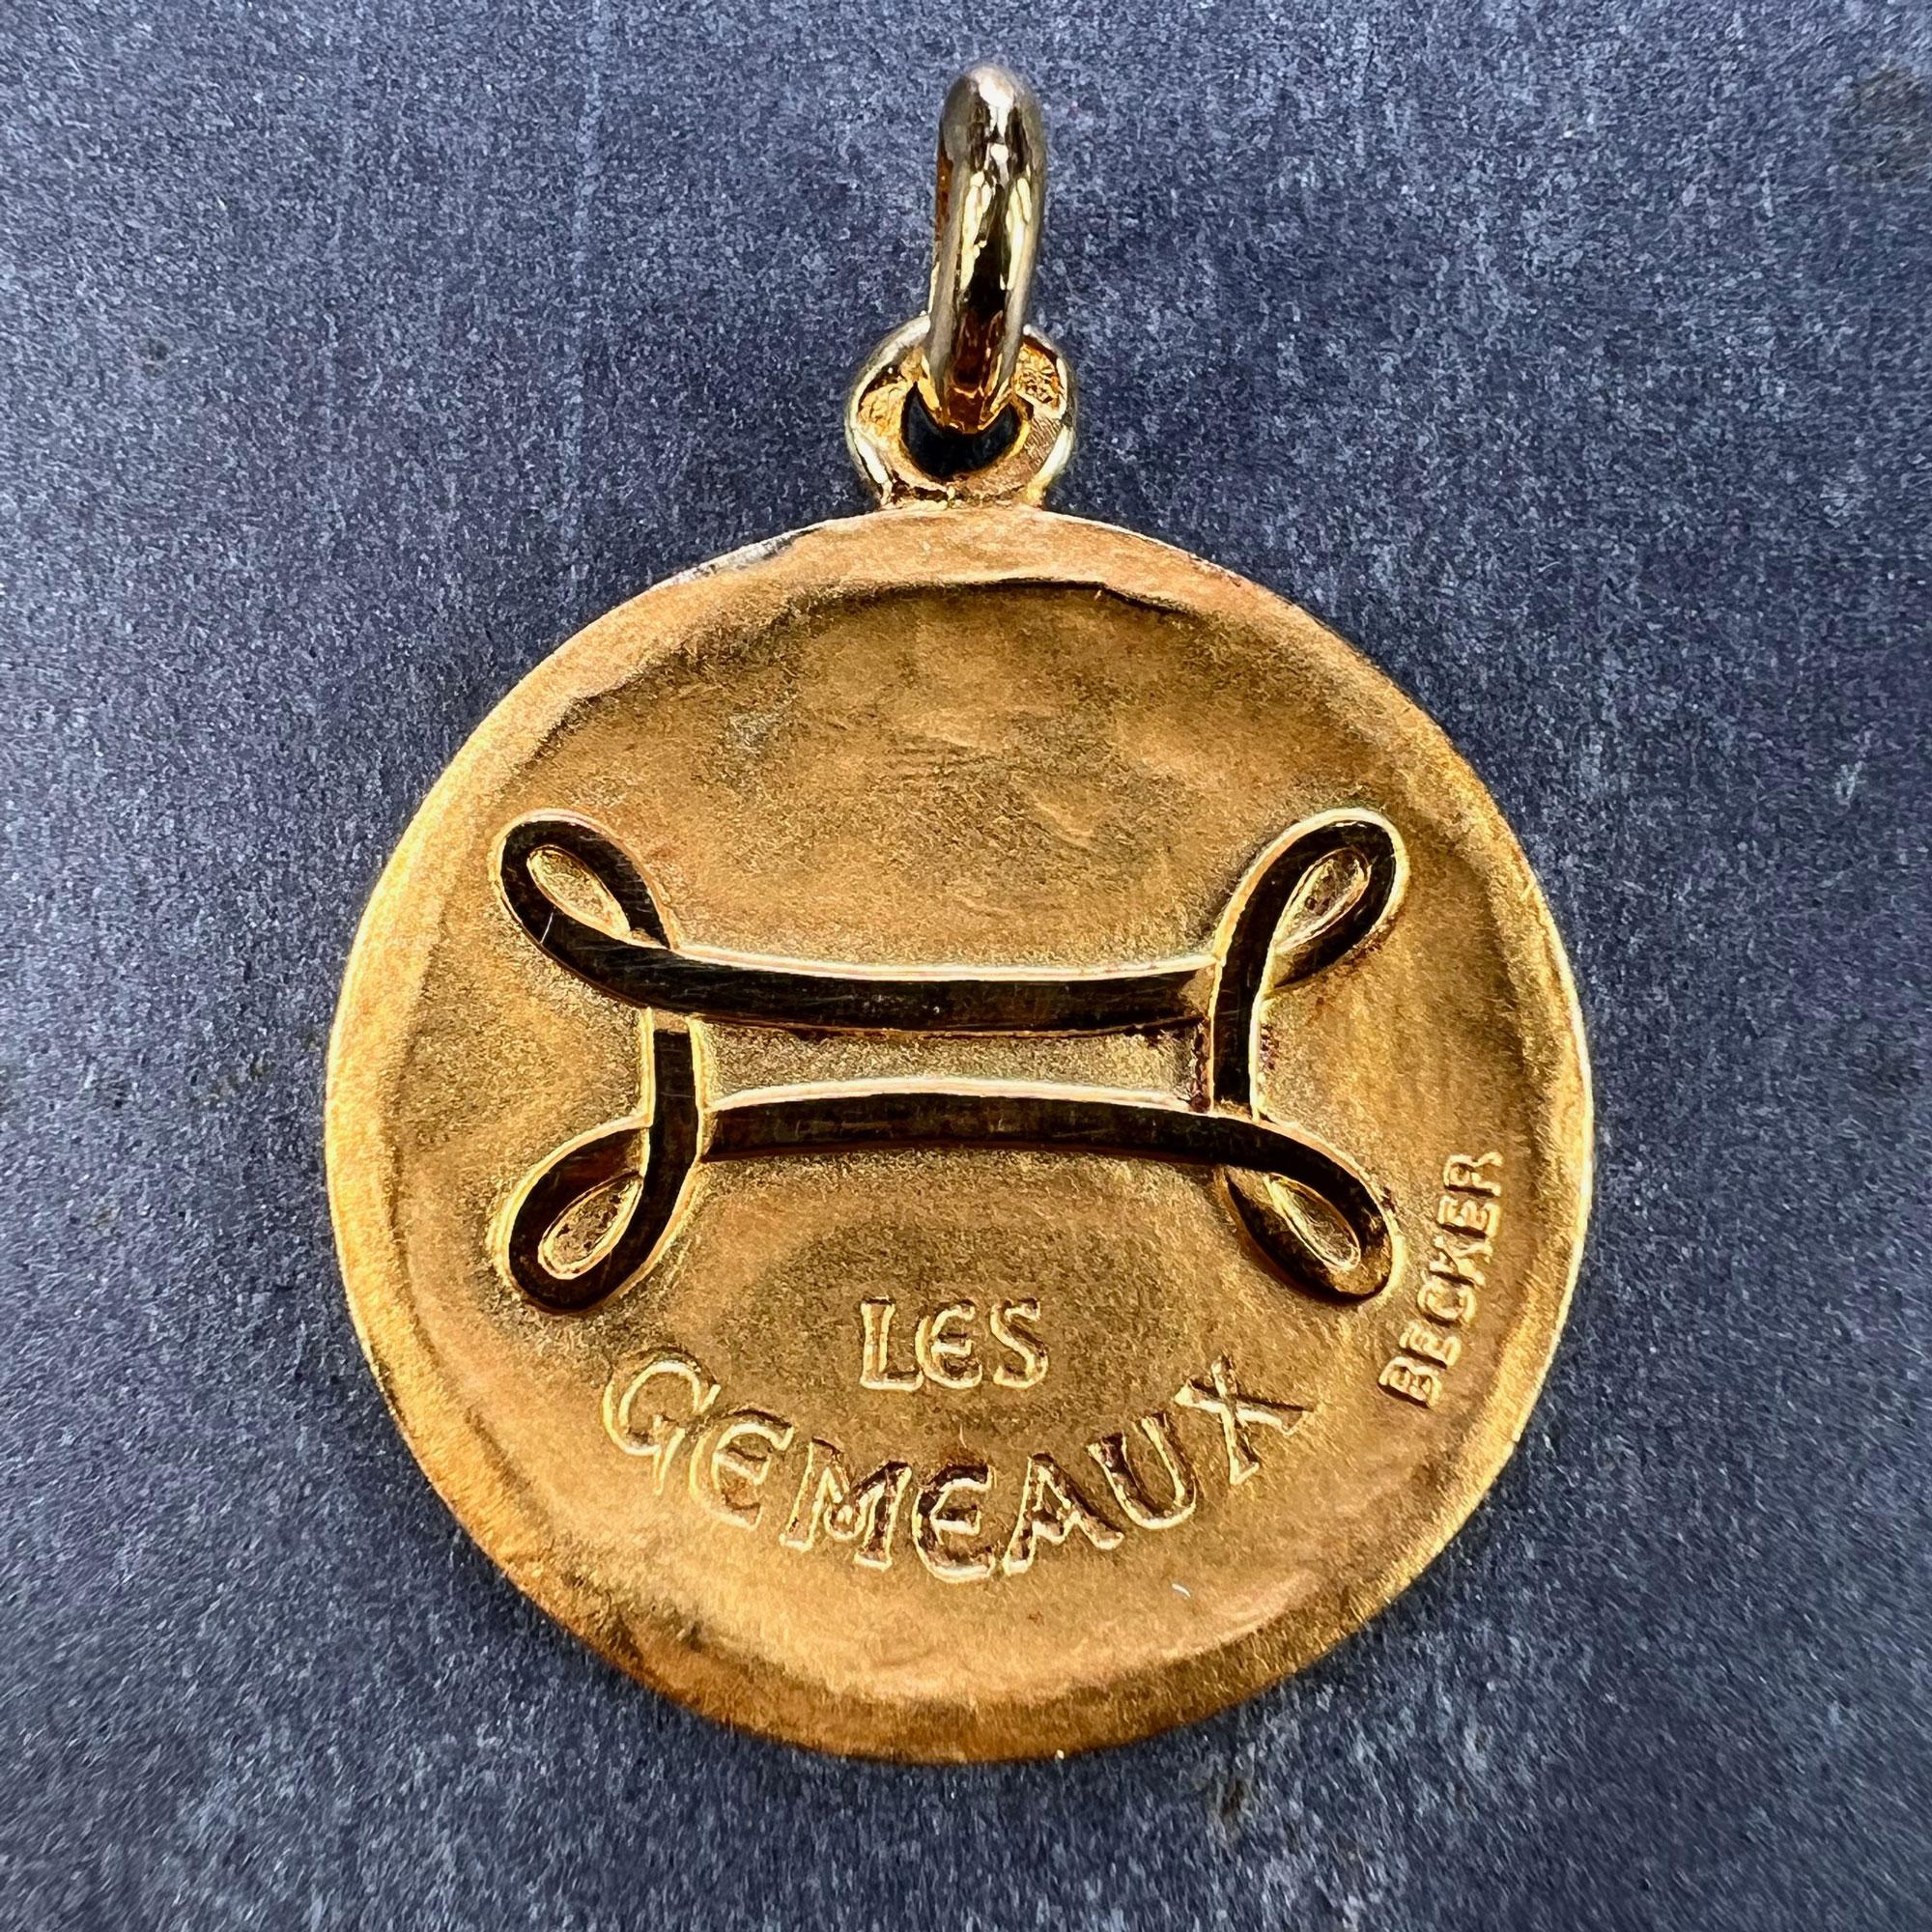 A French 18 karat (18K) yellow gold charm pendant depicting the Zodiac starsign of Gemini as the astrological symbol for the sign in polished gold on a matt gold convex recessed base, with the phrase 'Les Gemeaux' beneath. Signed Becker and stamped